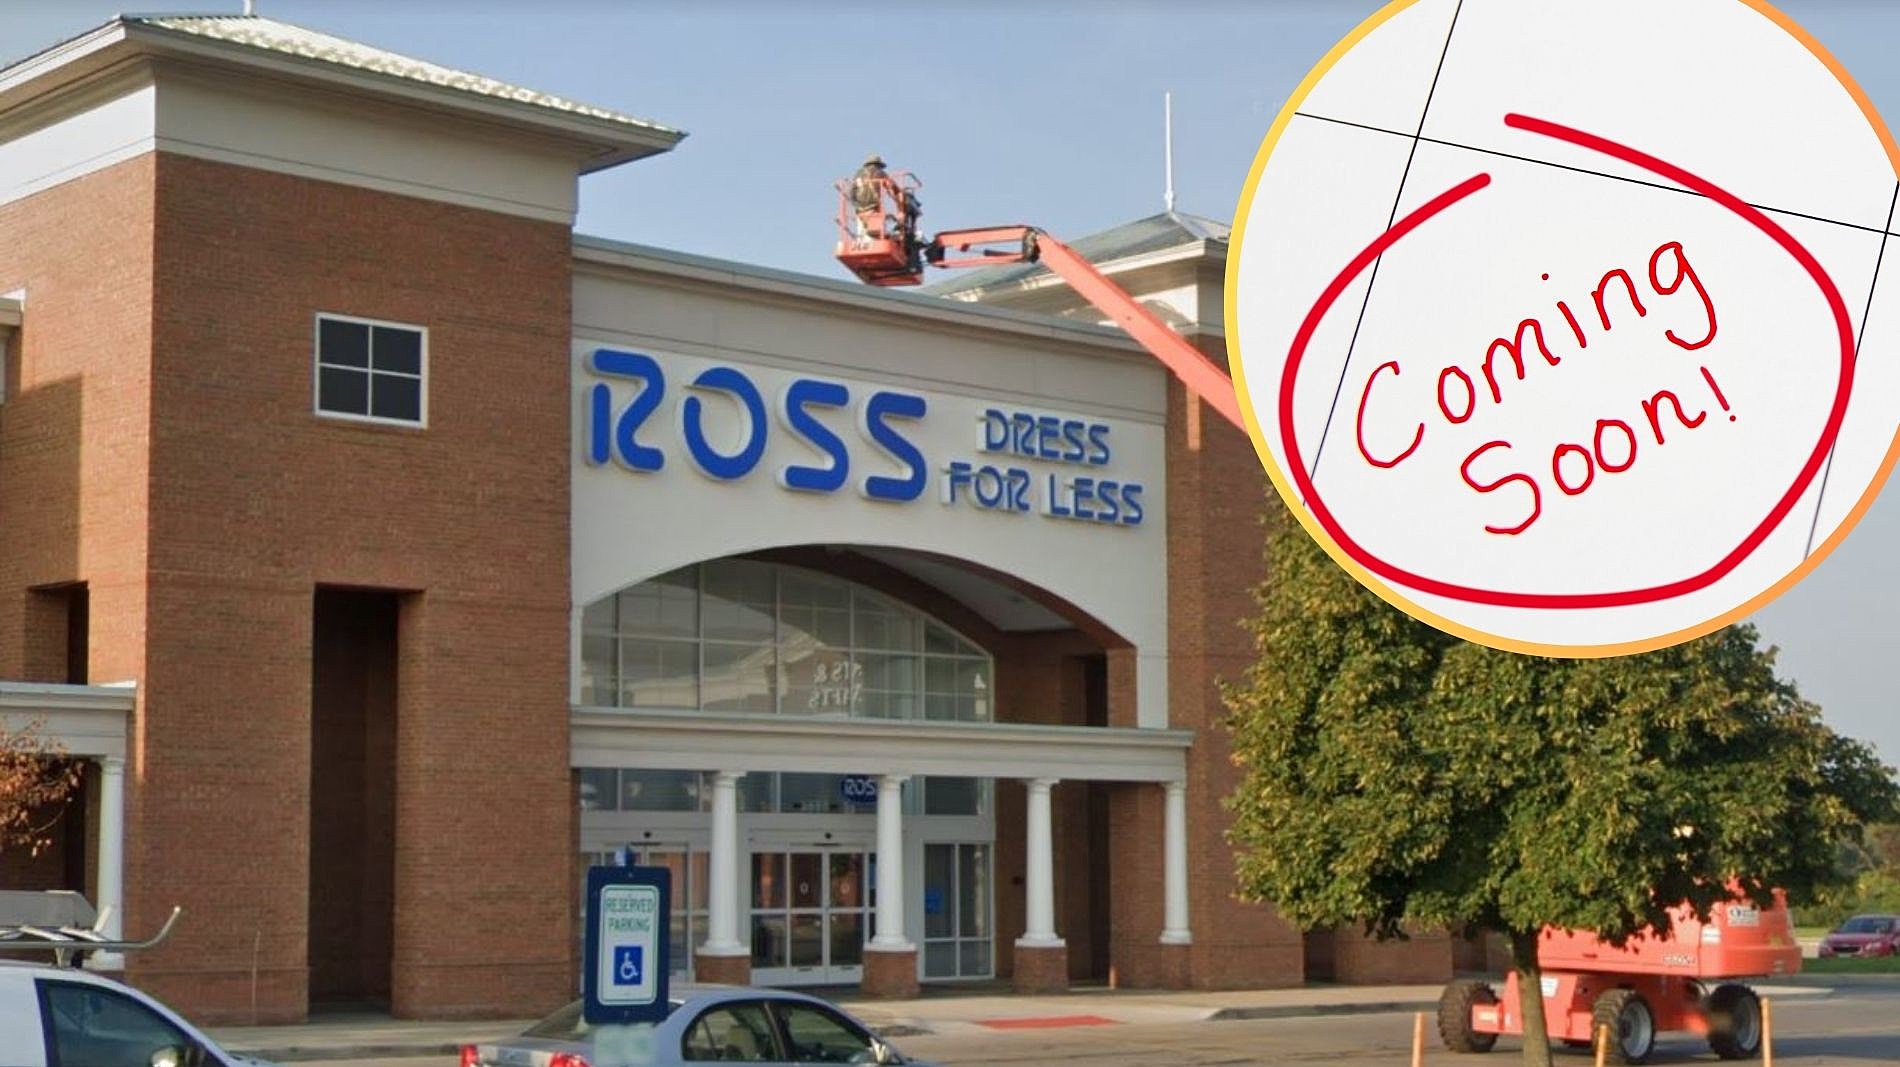 Popular Ross Dress for Less to Begin Michigan Retail Invasion